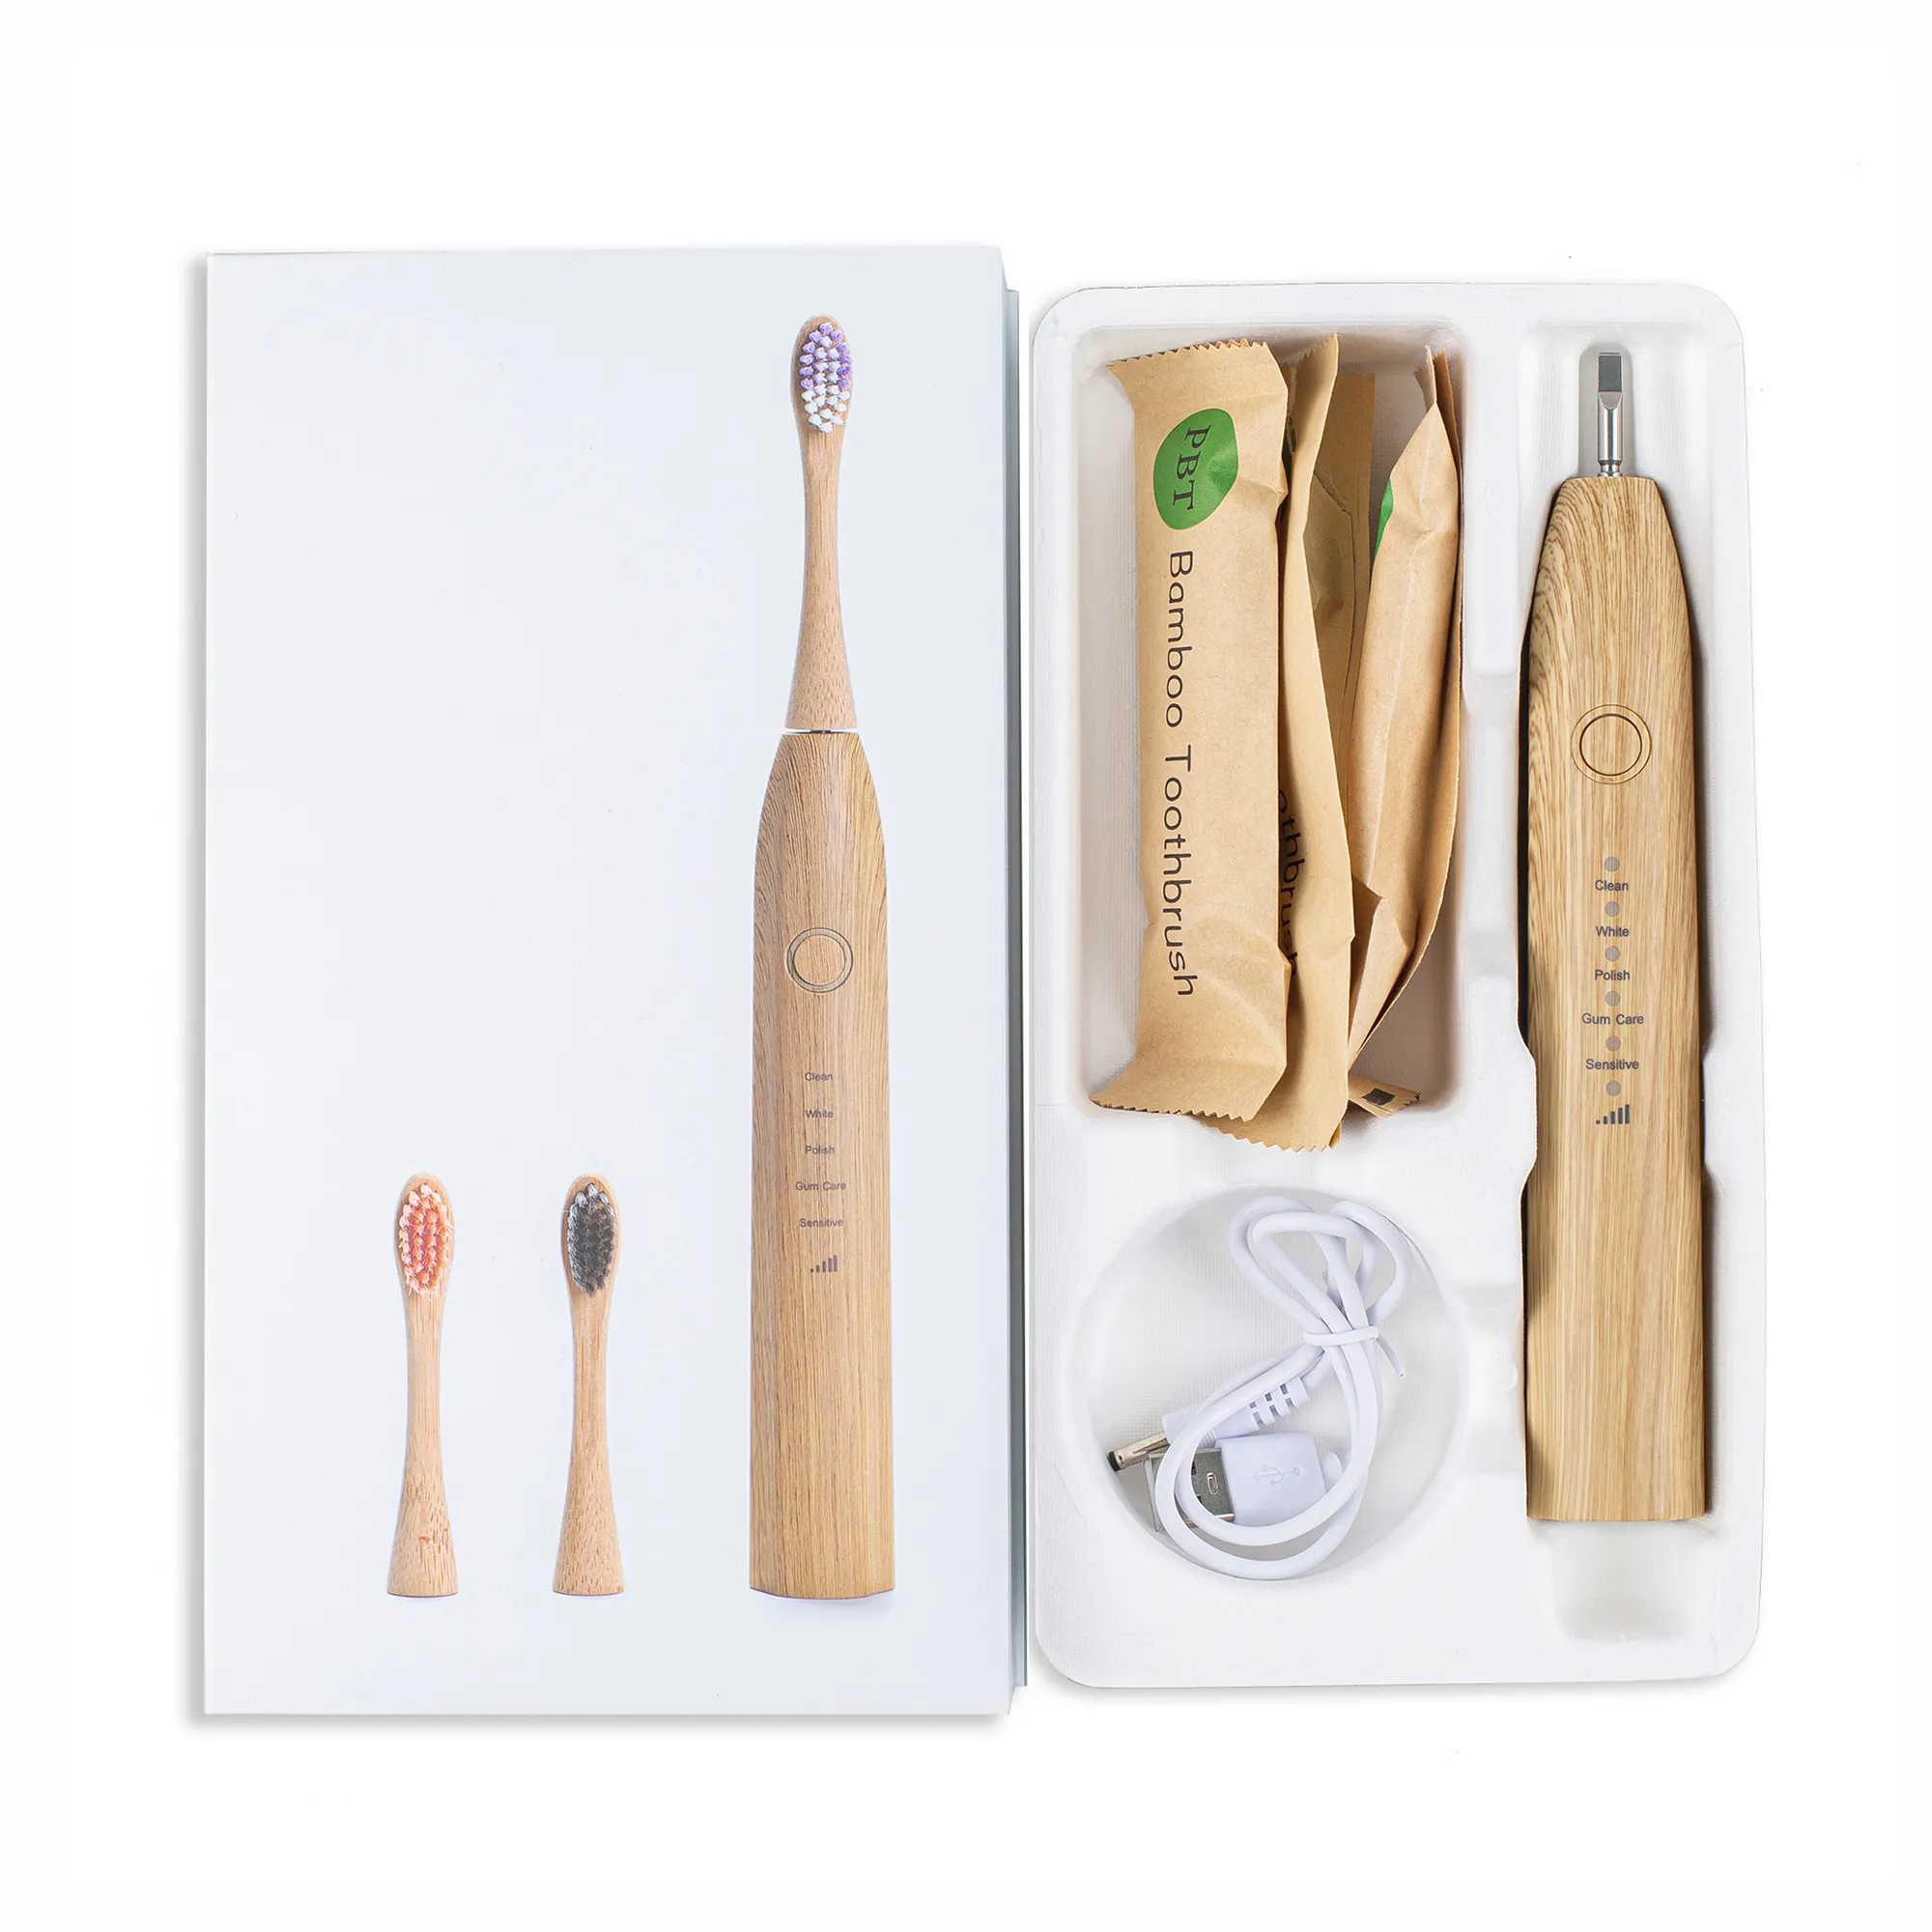 100% eco-friendly biodegradable waterproof sonicare bamboo rechargeable electric toothbrush for adult